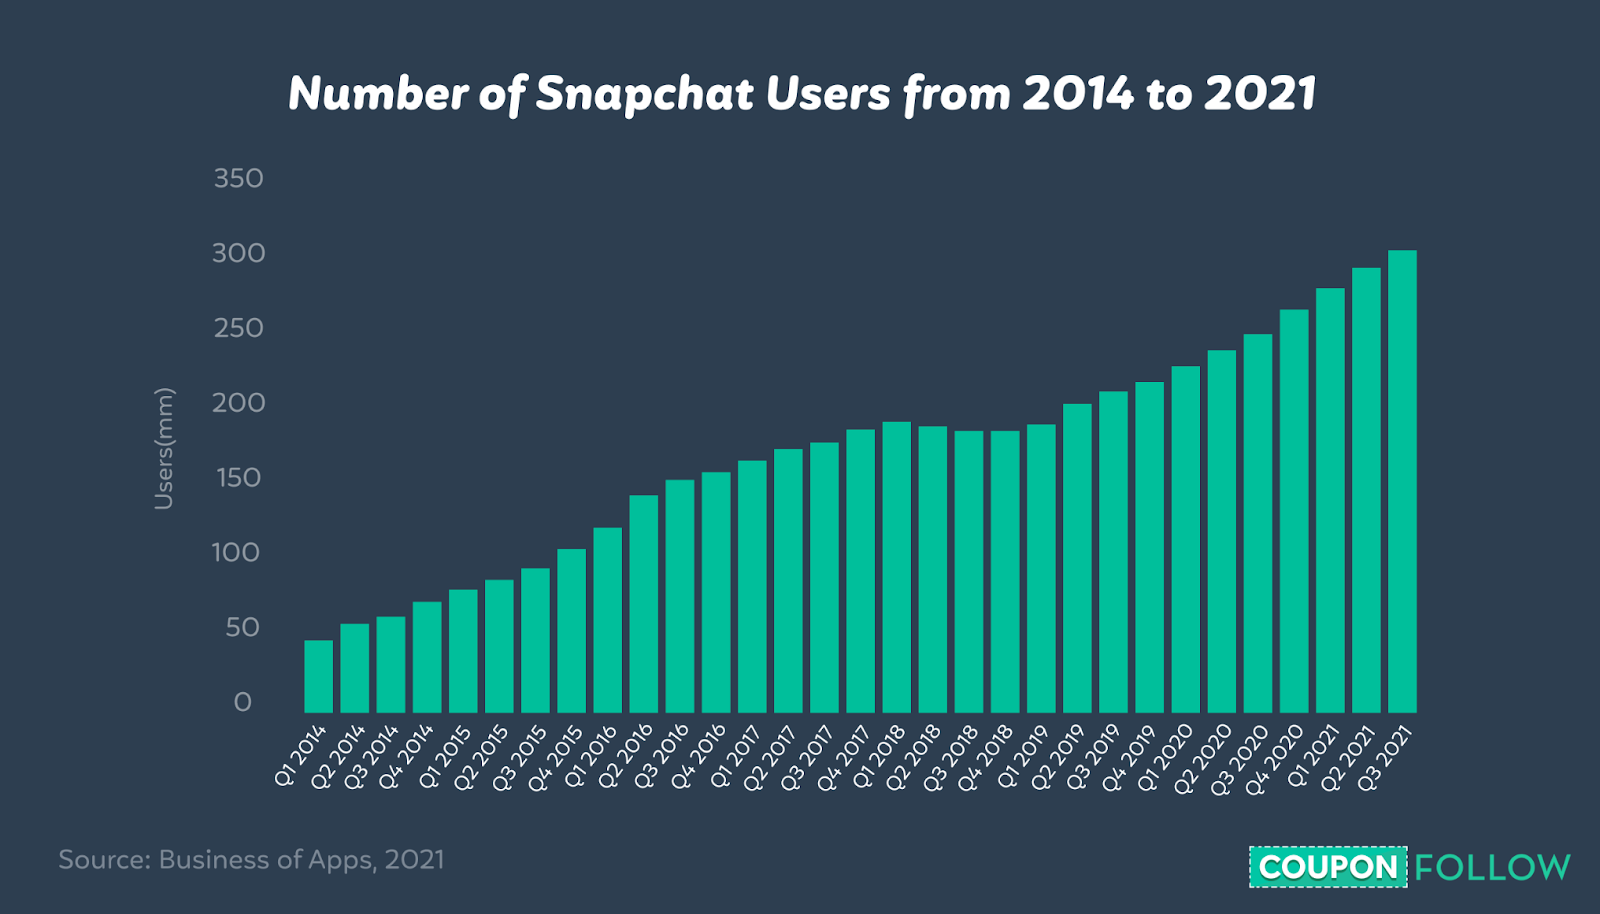 Graph depicting the number of Snapchat users from 2014 to 2021